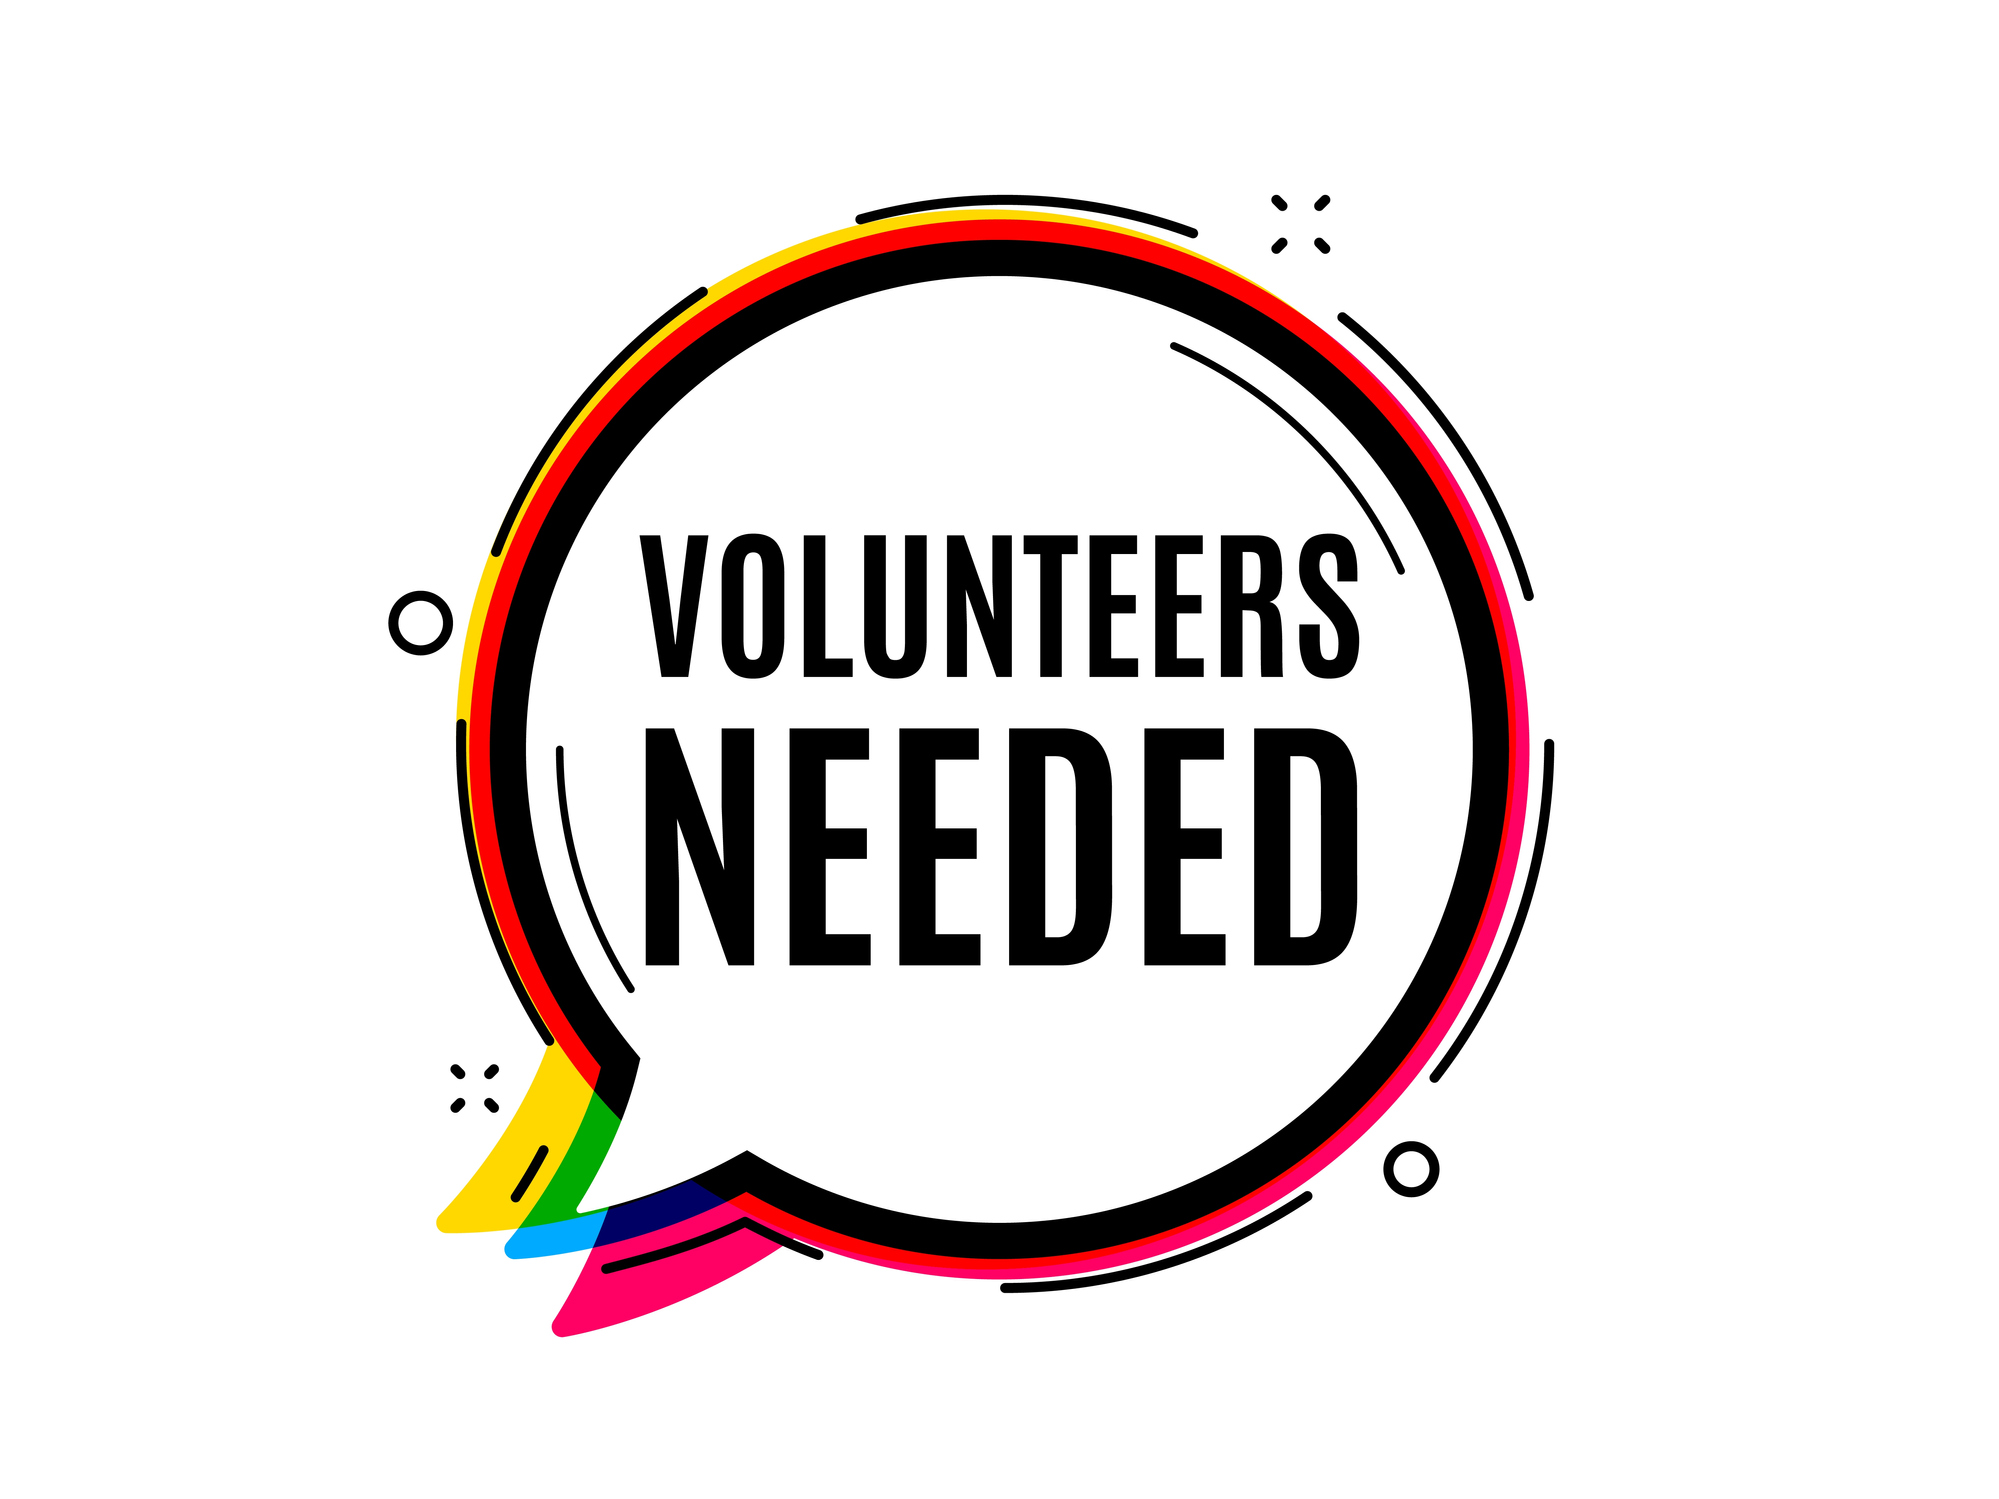 Volunteers needed. Speech bubble vector banner. Volunteering service sign. Charity work symbol. Thought or dialogue speech balloon shape. Volunteers needed chat think bubble. Vector